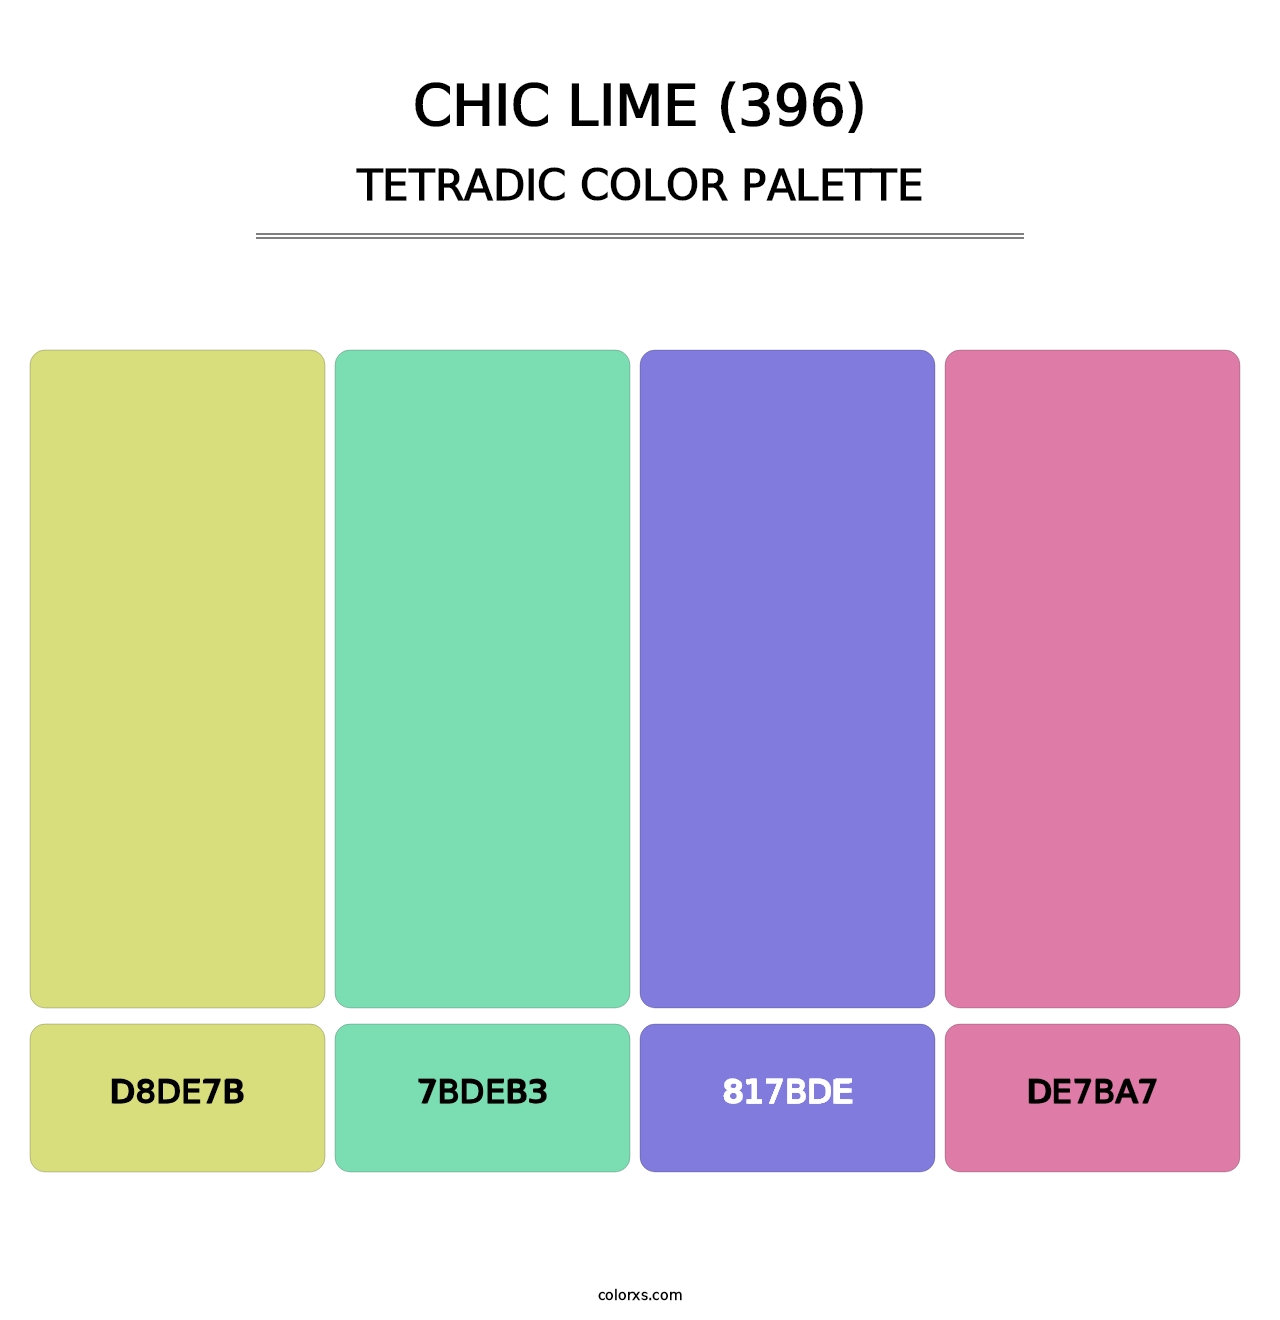 Chic Lime (396) - Tetradic Color Palette